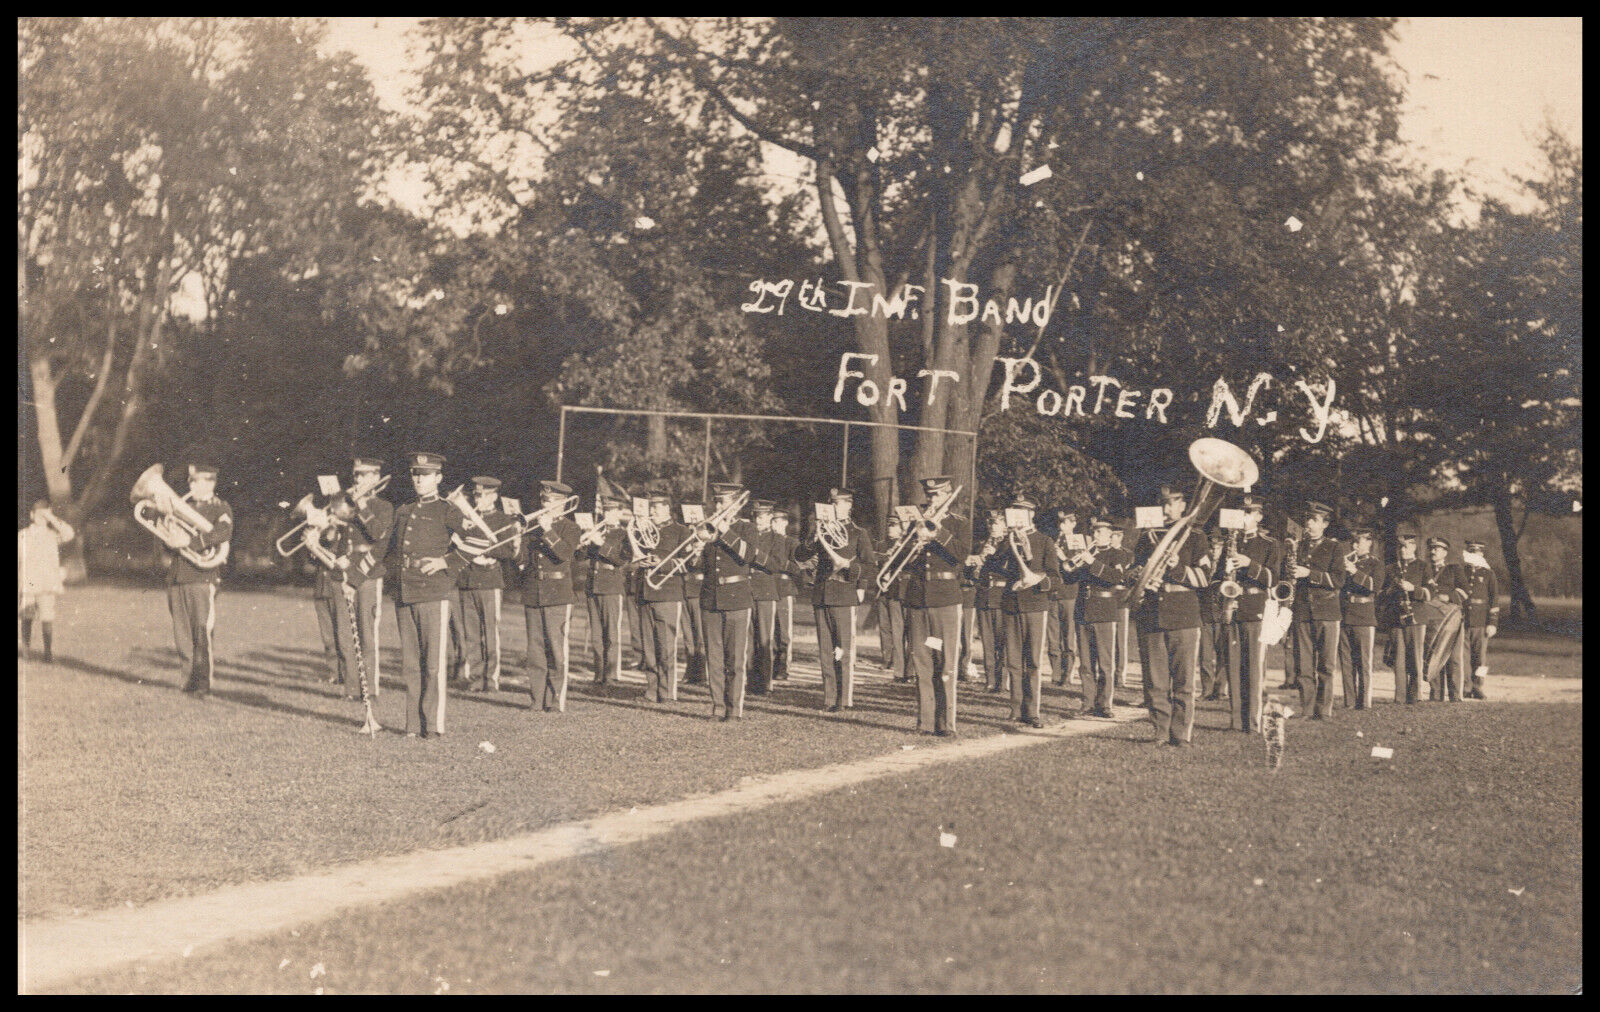 Fort Porter, New York, 29th Infantry Band, Erie County, Real Photo Postcard RPPC